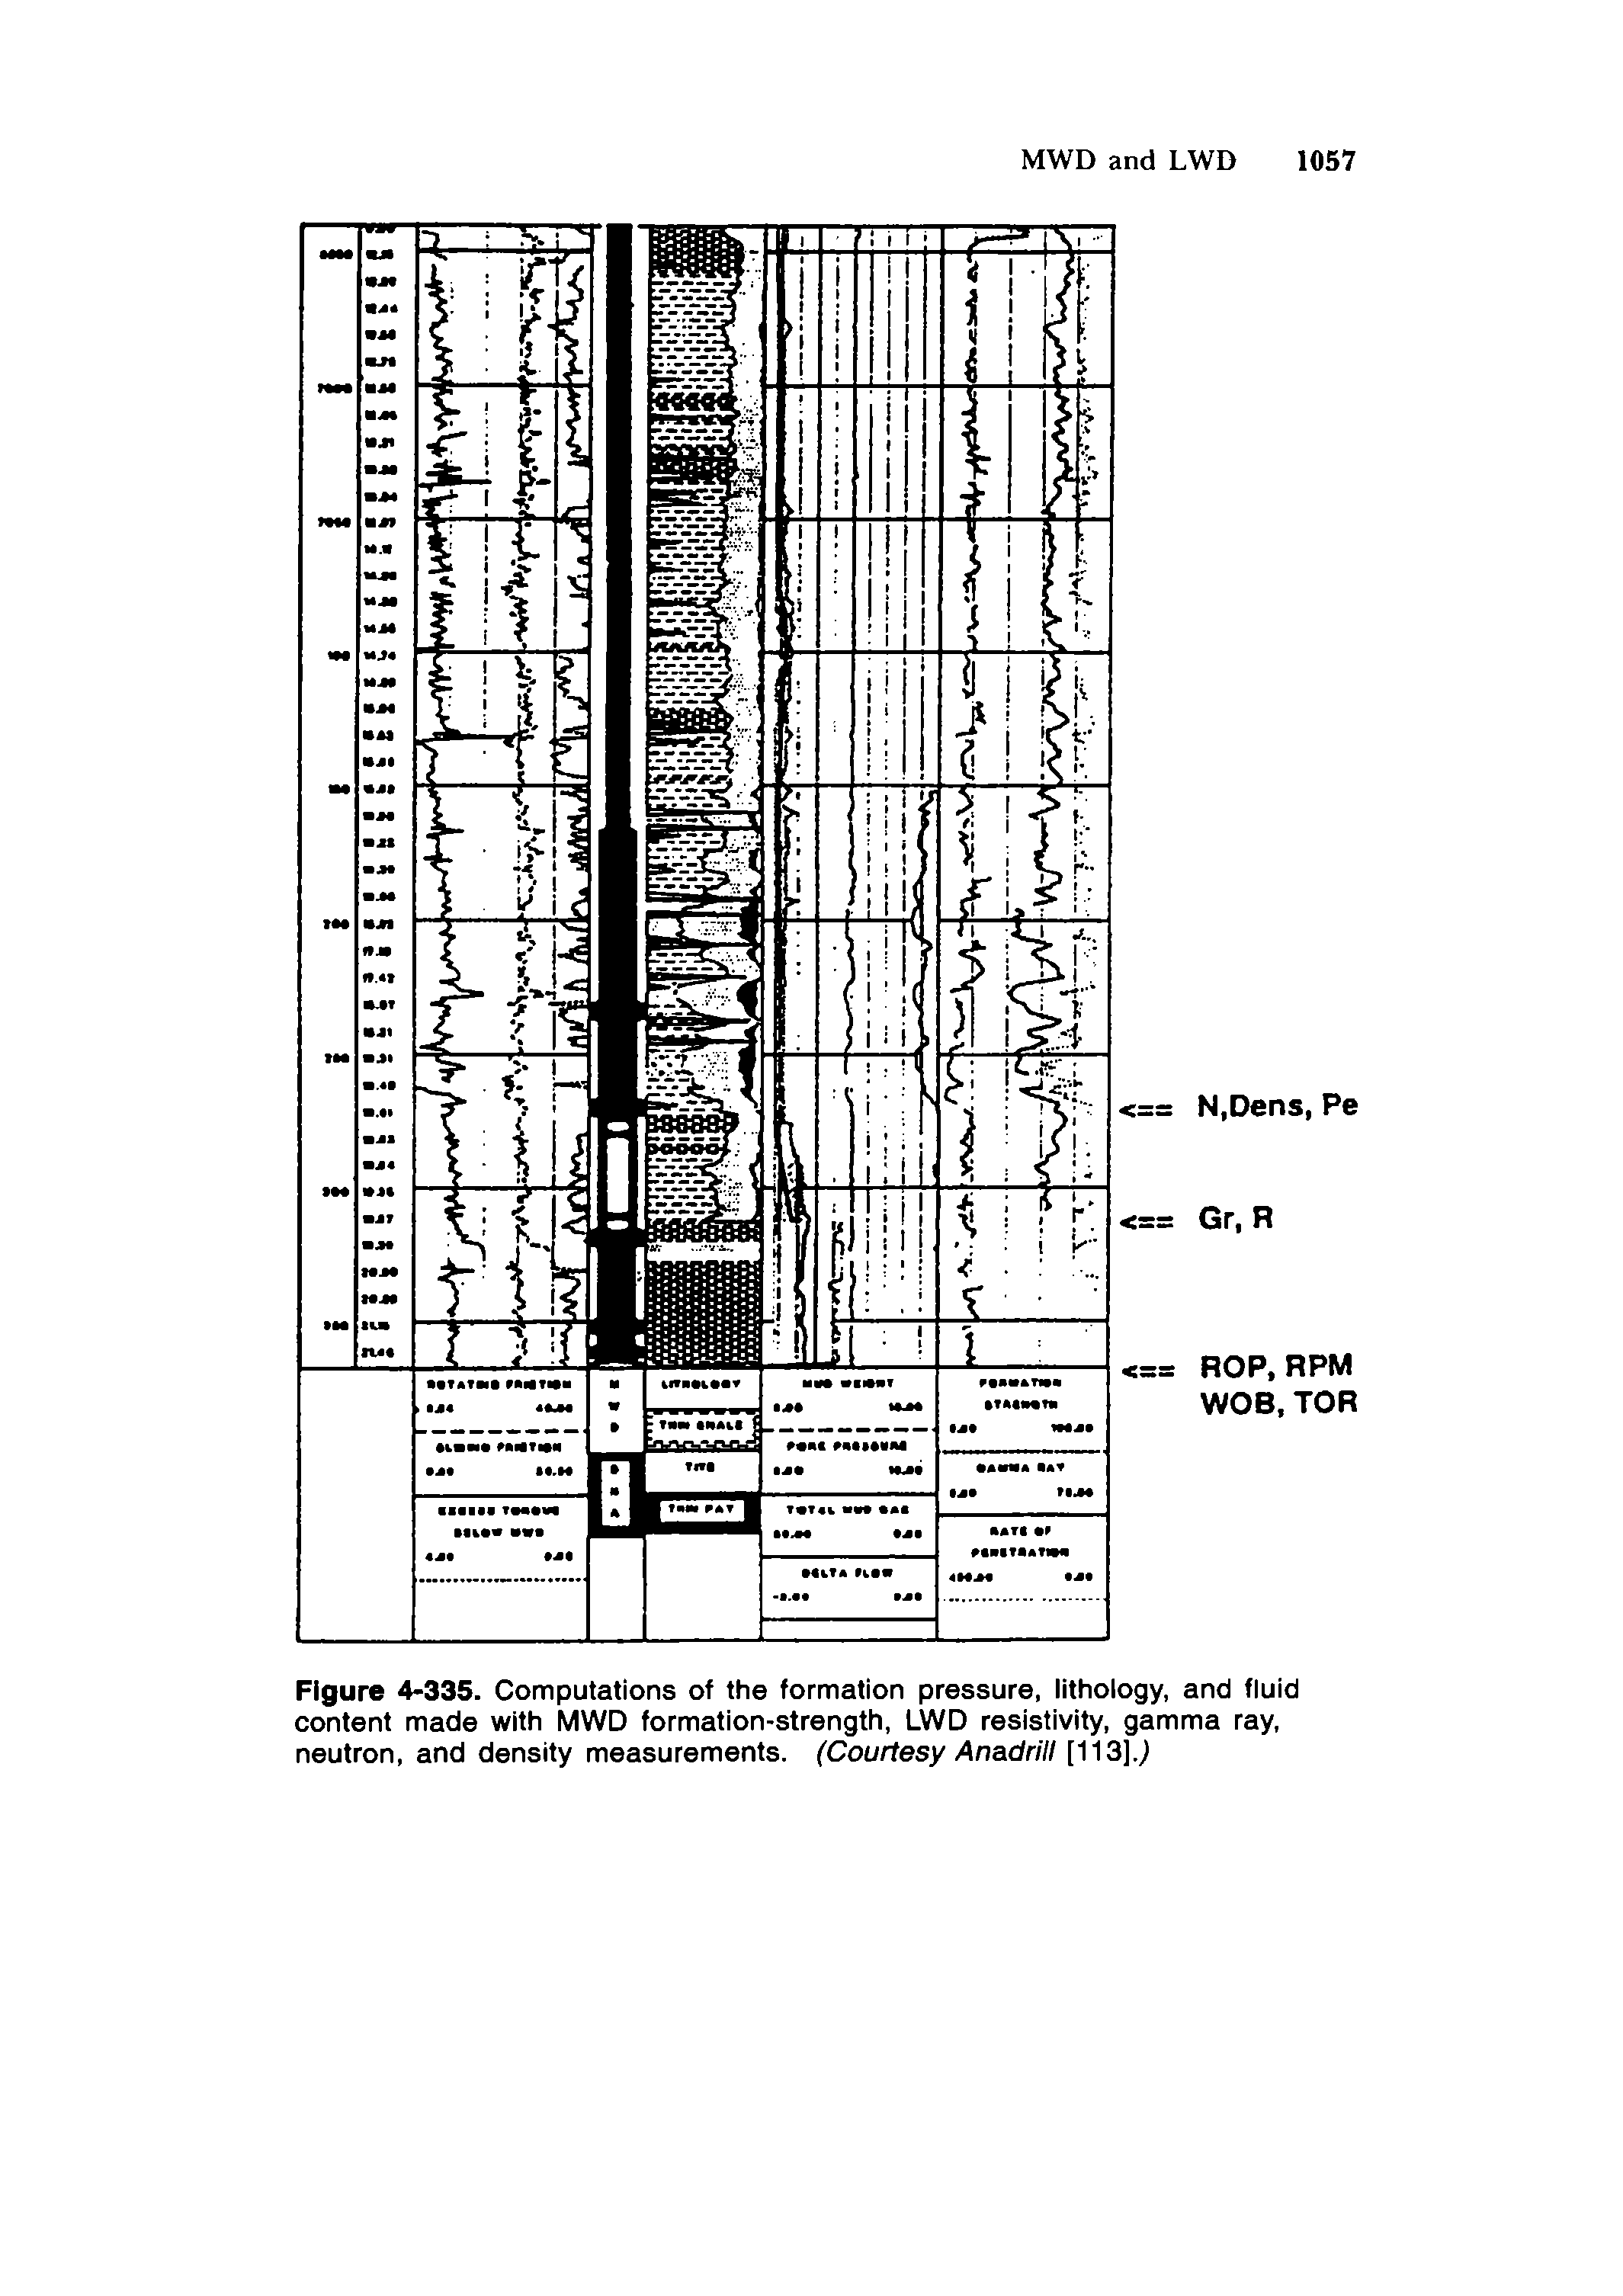 Figure 4-335. Computations of the formation pressure, lithology, and fluid content made with MWD formation-strength, LWD resistivity, gamma ray, neutron, and density measurements. (Courtesy Anadrill [113].,)...